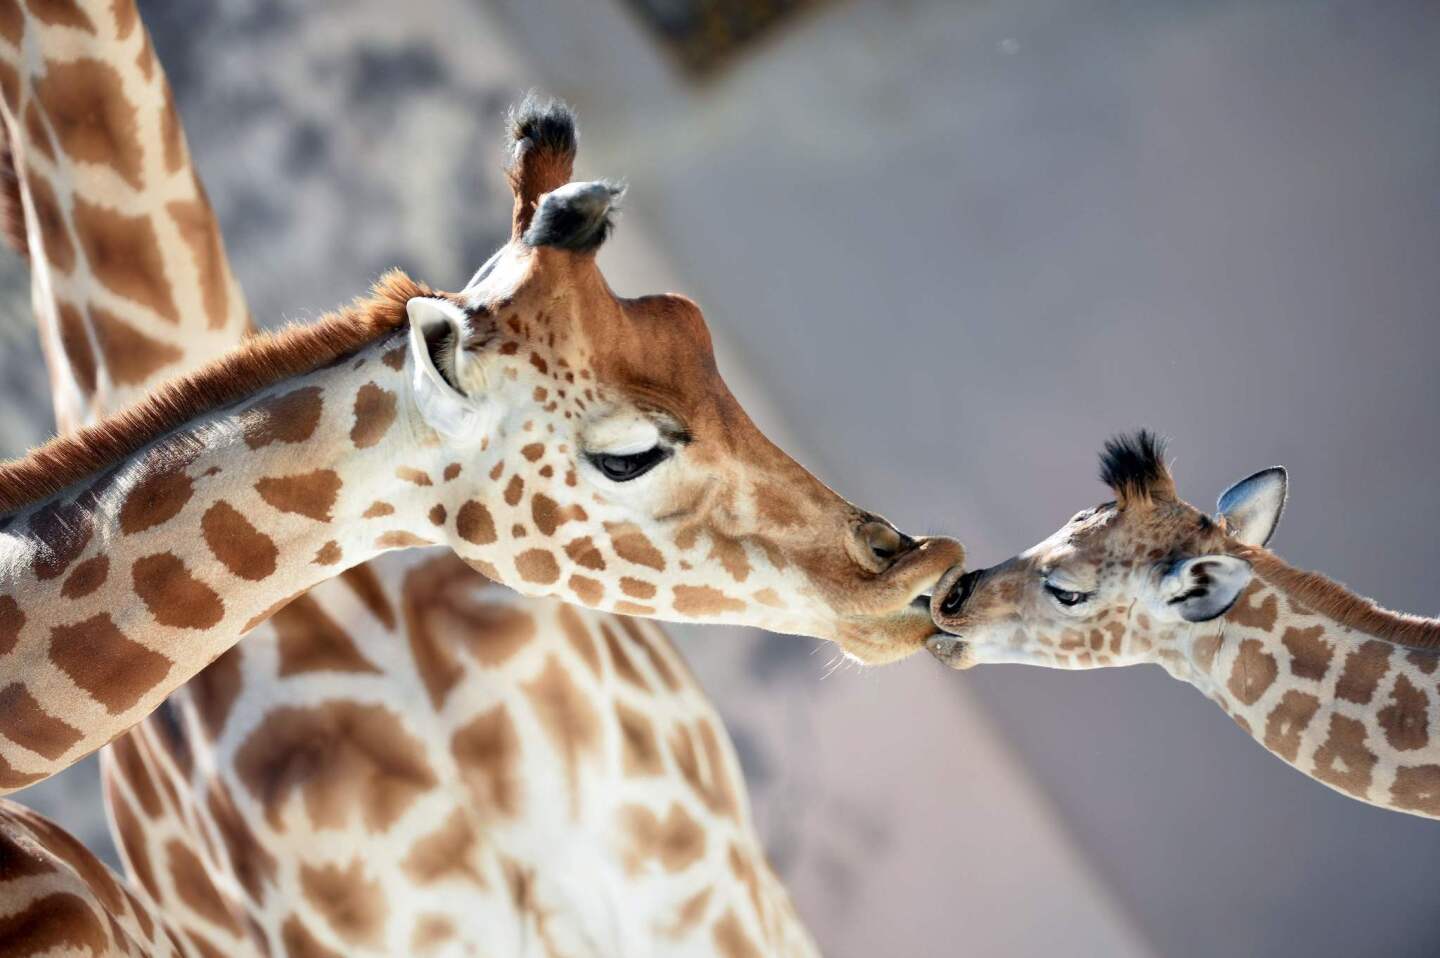 Baby giraffe "Kenai," right, born on Aug. 25, 2016, kisses his mother "Dioni" on Aug. 31 at the zoo of La Fleche, France.